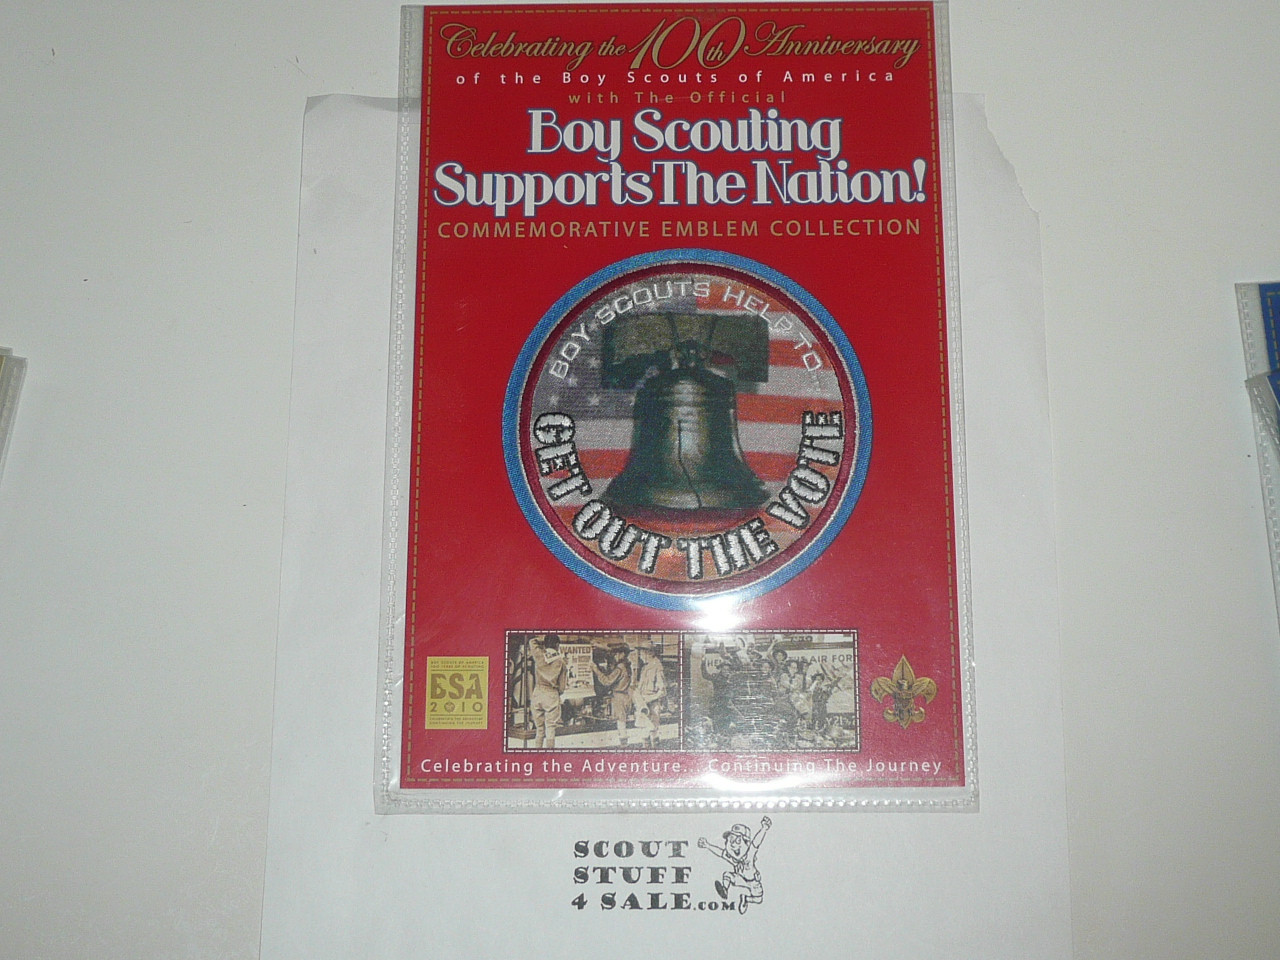 2010 100th Boy Scout Anniversary Commemorative Patch, Boy Scouting Supports the Nation Series, Get Out the Vote